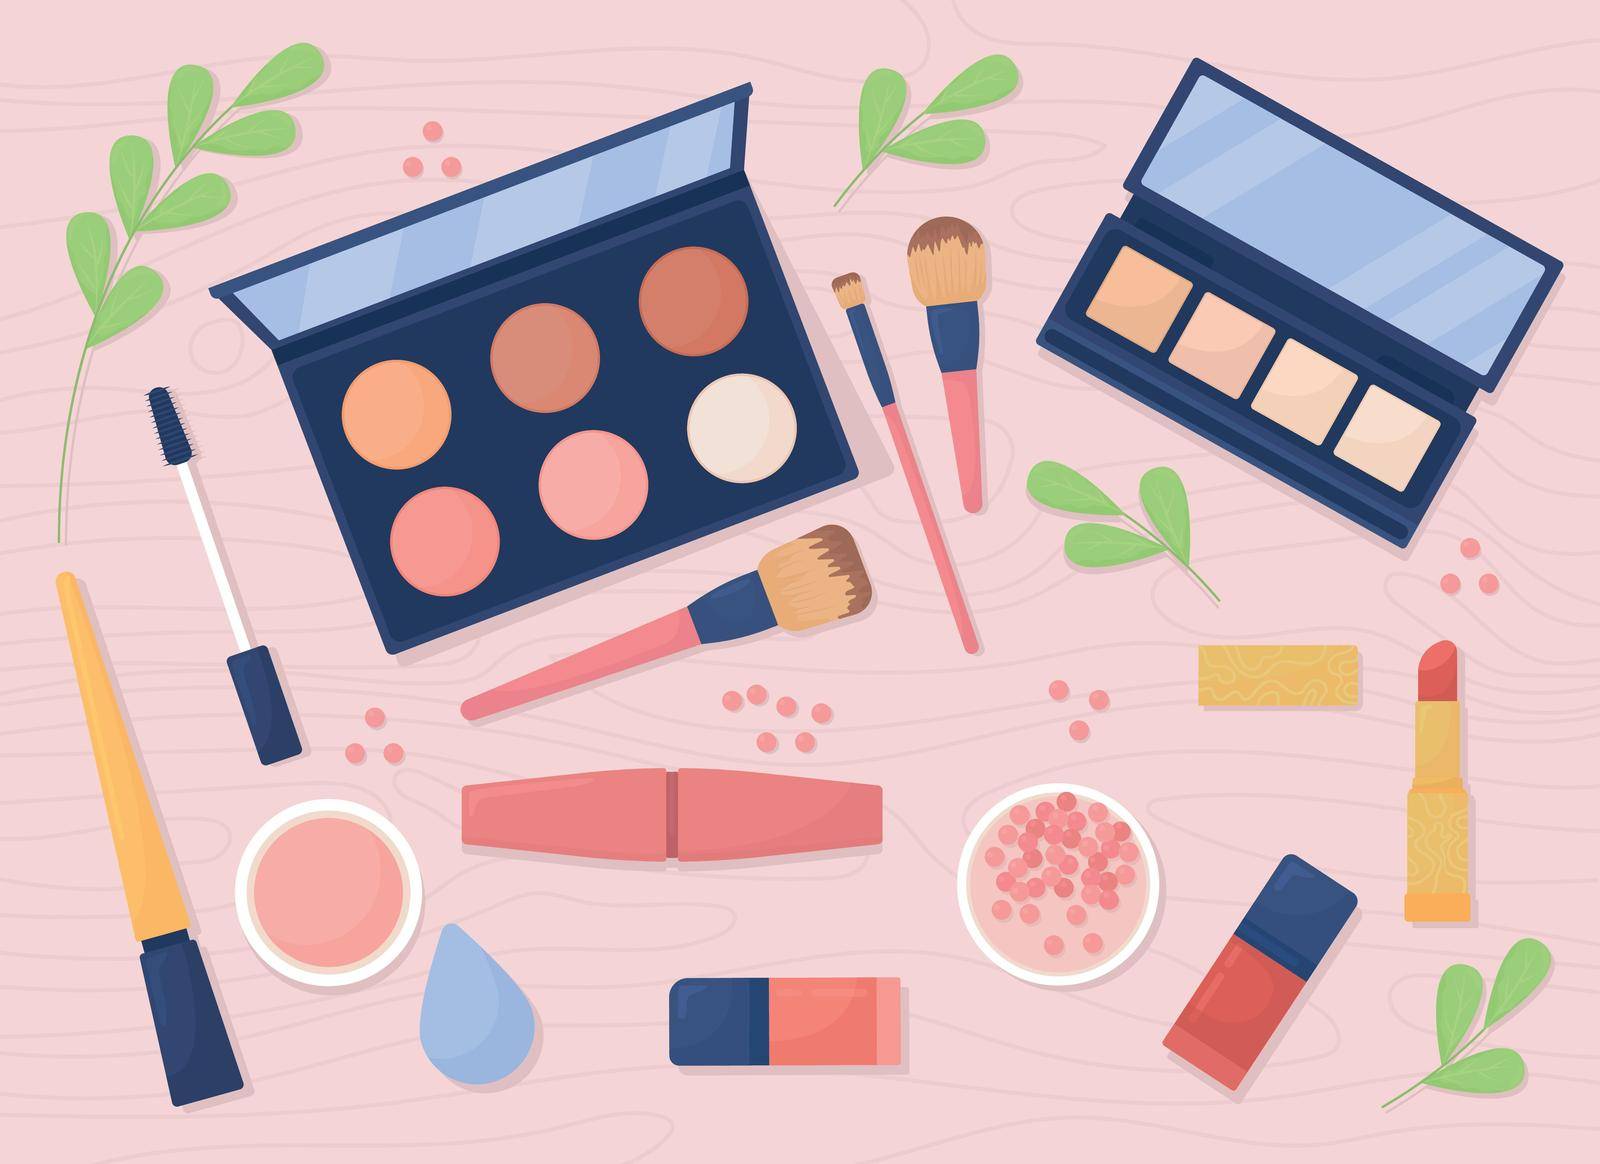 Cosmetics flat color vector illustration. Makeup products. Eyeshadows with lipsticks and mascara. Skin care and beauty. Top view 2D cartoon illustration with desktop on background collection